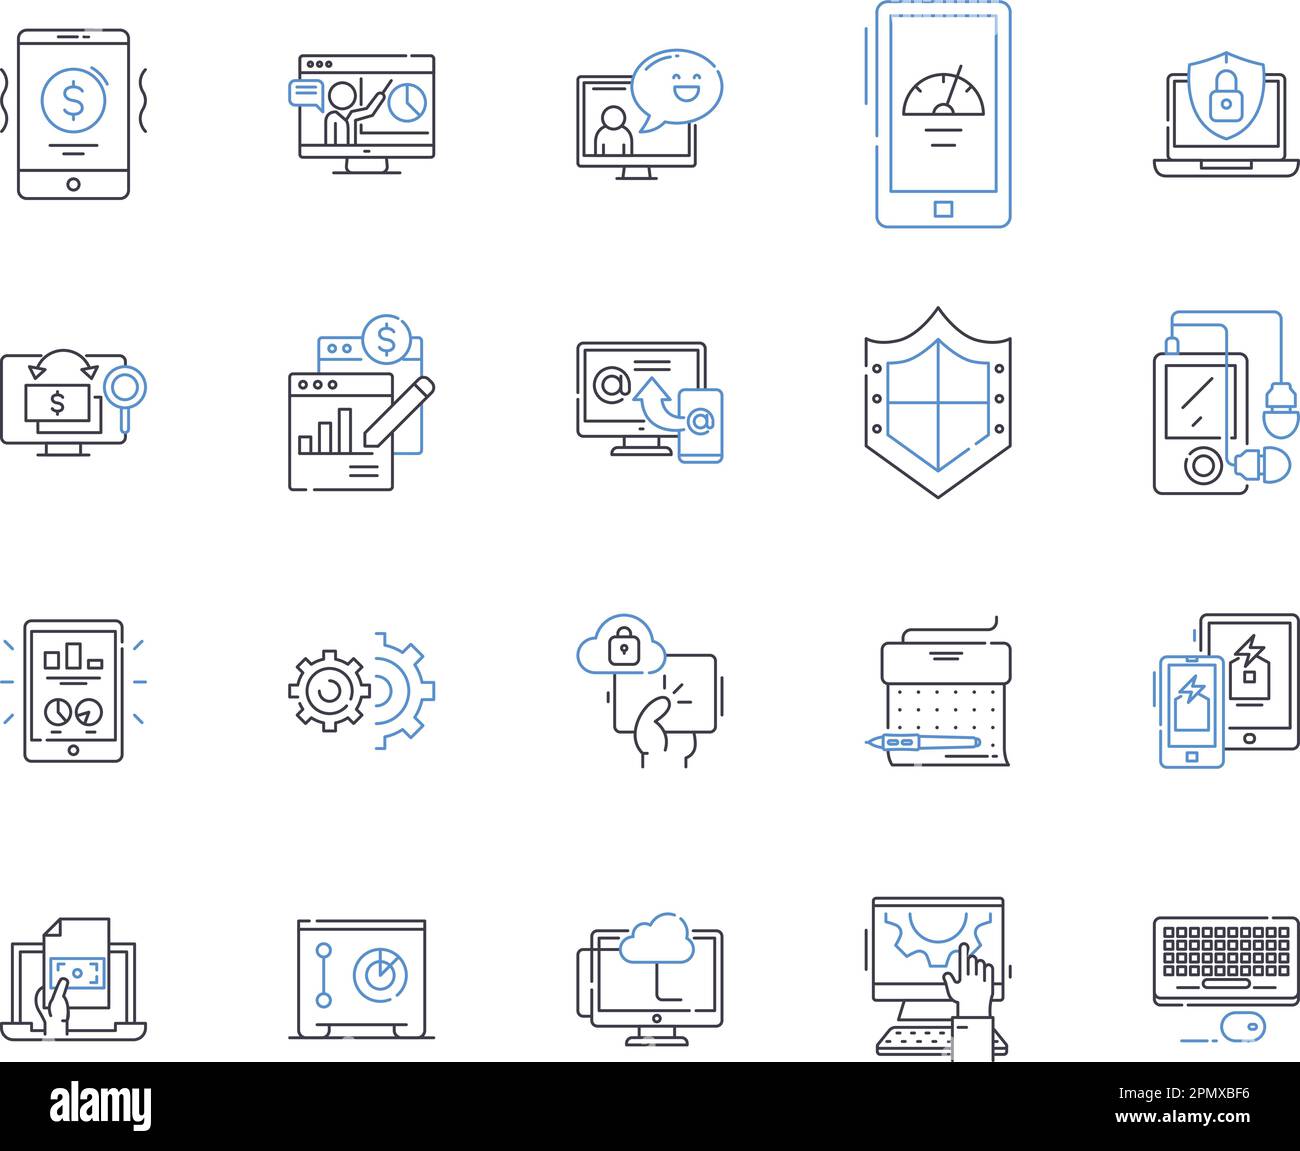 Gadjets and software outline icons collection. Gadgets, Software, Electronics, Technology, Computers, Phones, Tablets vector and illustration concept Stock Vector